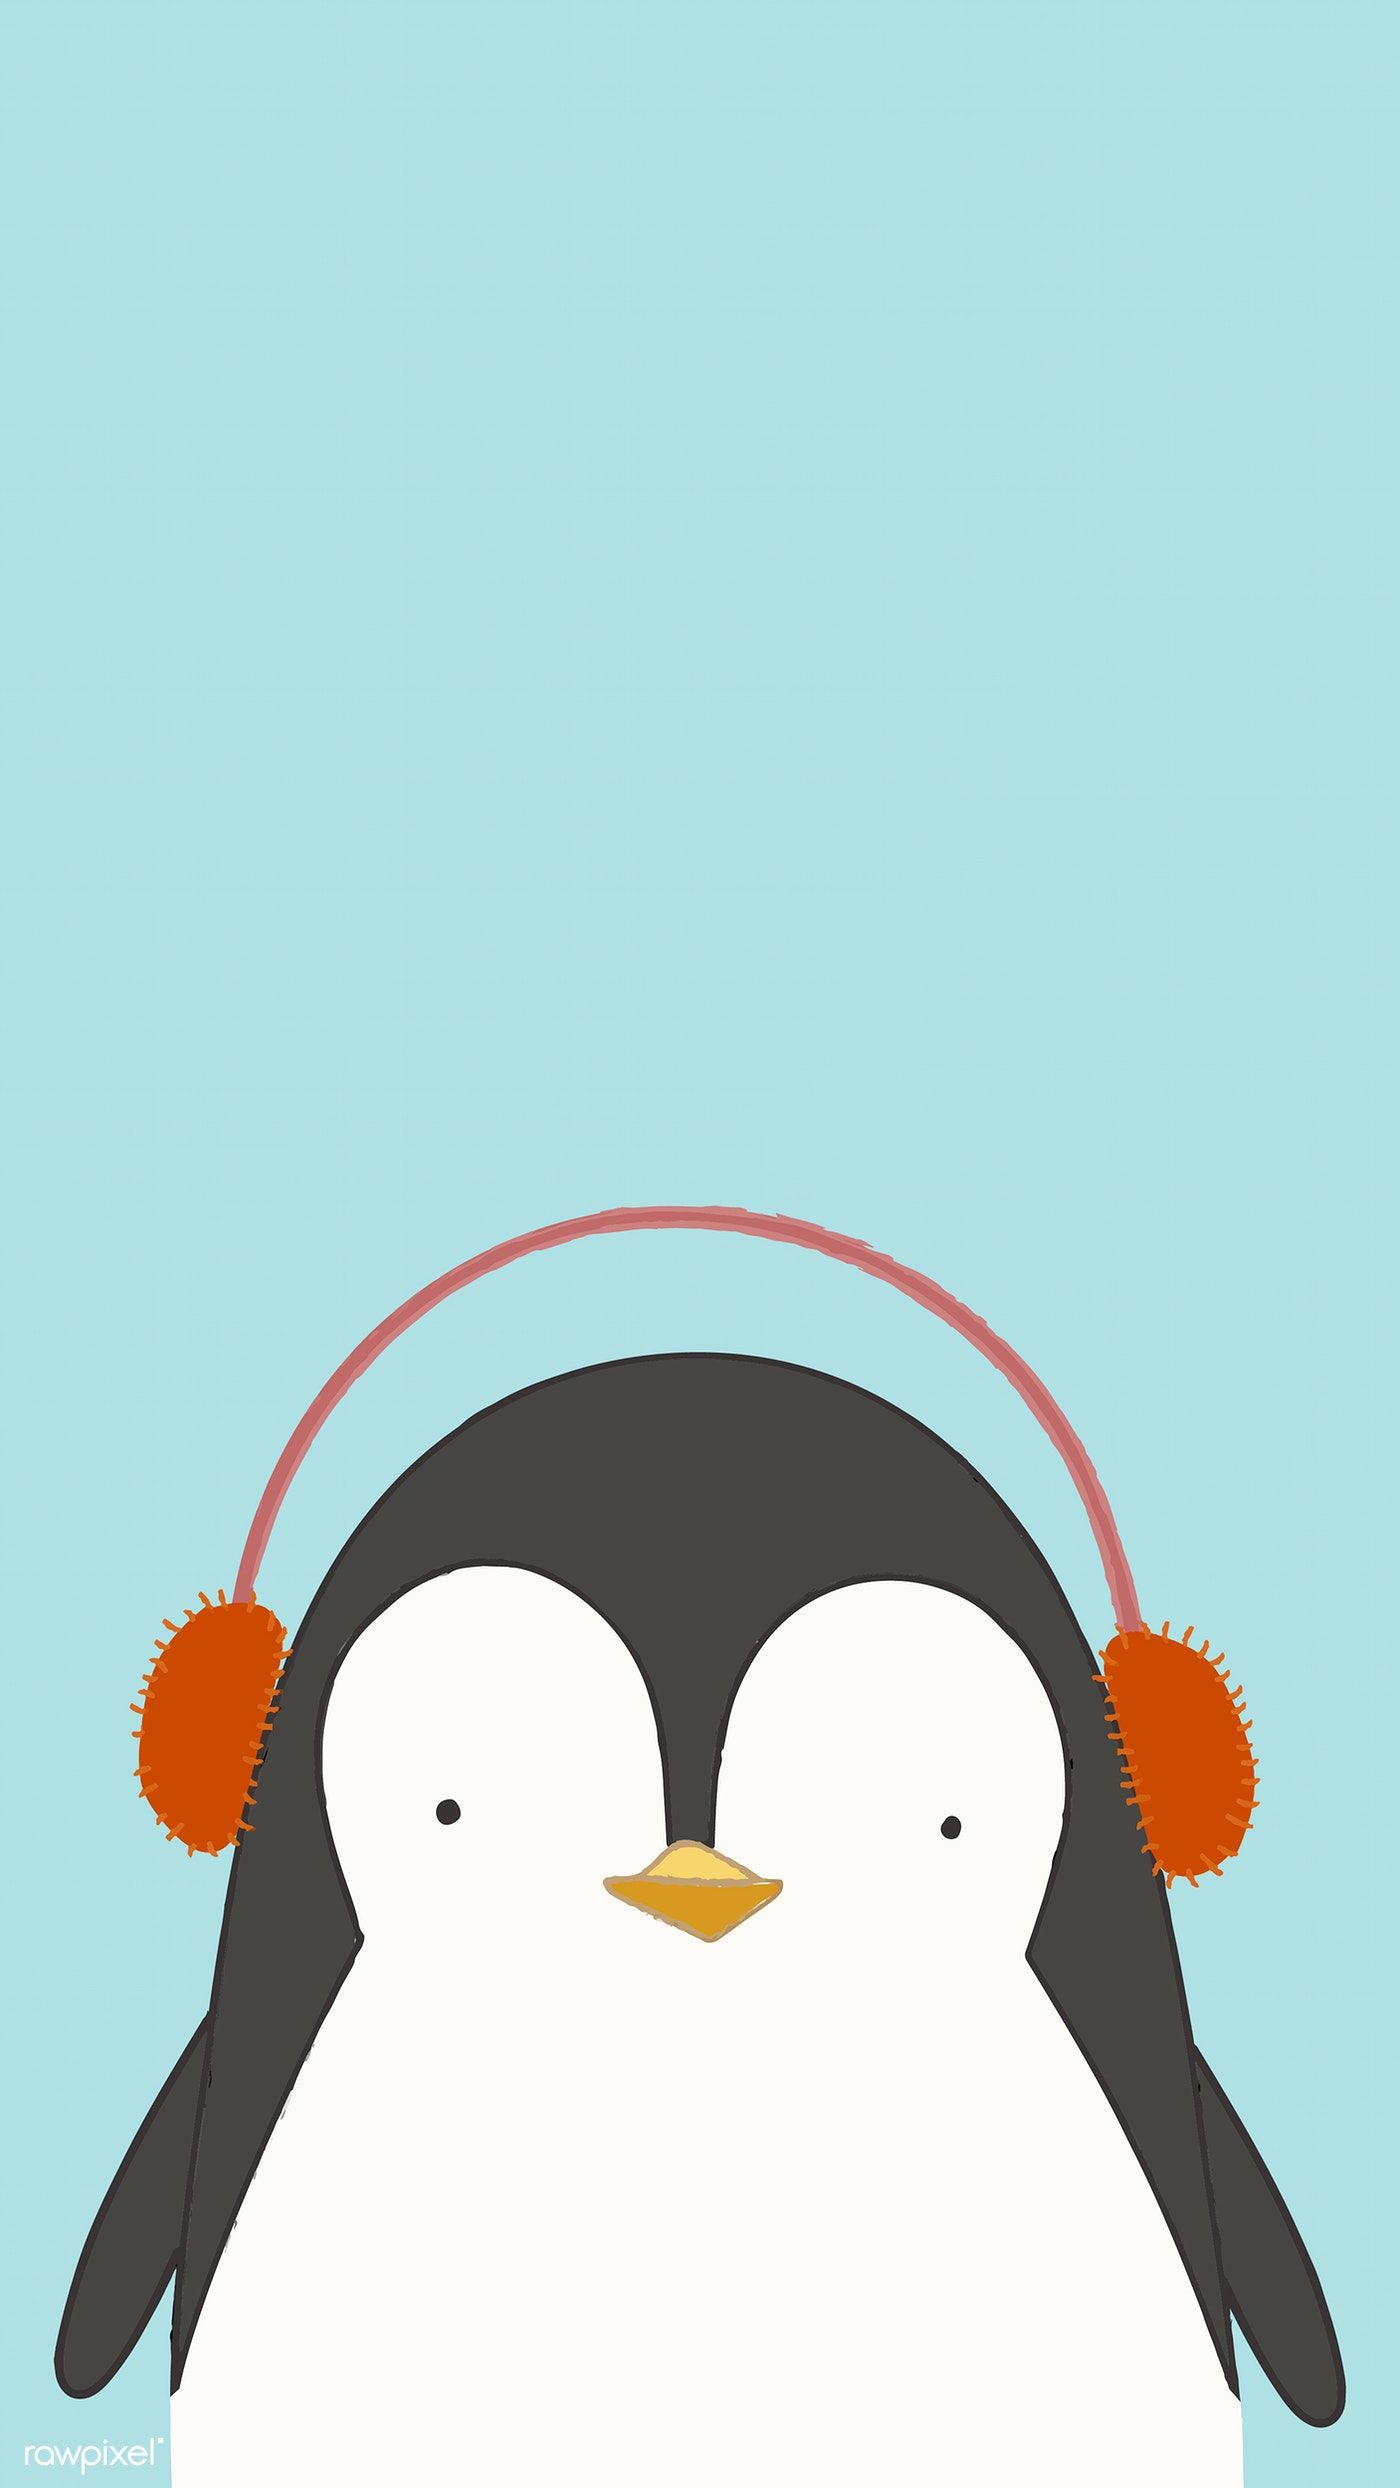 Cute penguin listening to music mobile phone wallpaper vector. free image / marinemynt. Cute penguins, Penguins, Phone wallpaper design